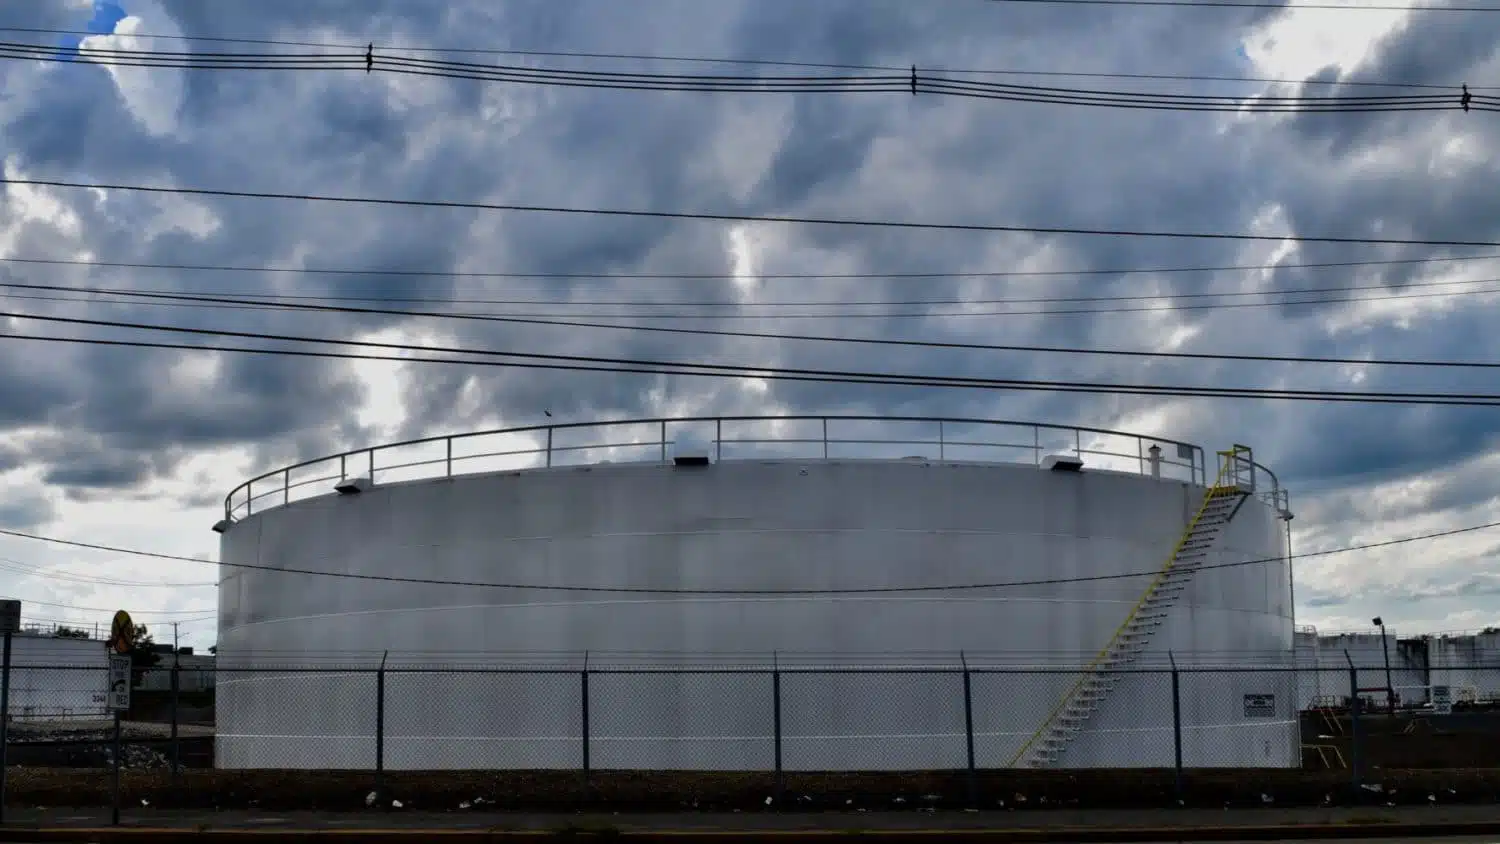 Greg Gerritt to ProJo: More natural gas infrastructure is not a good thing